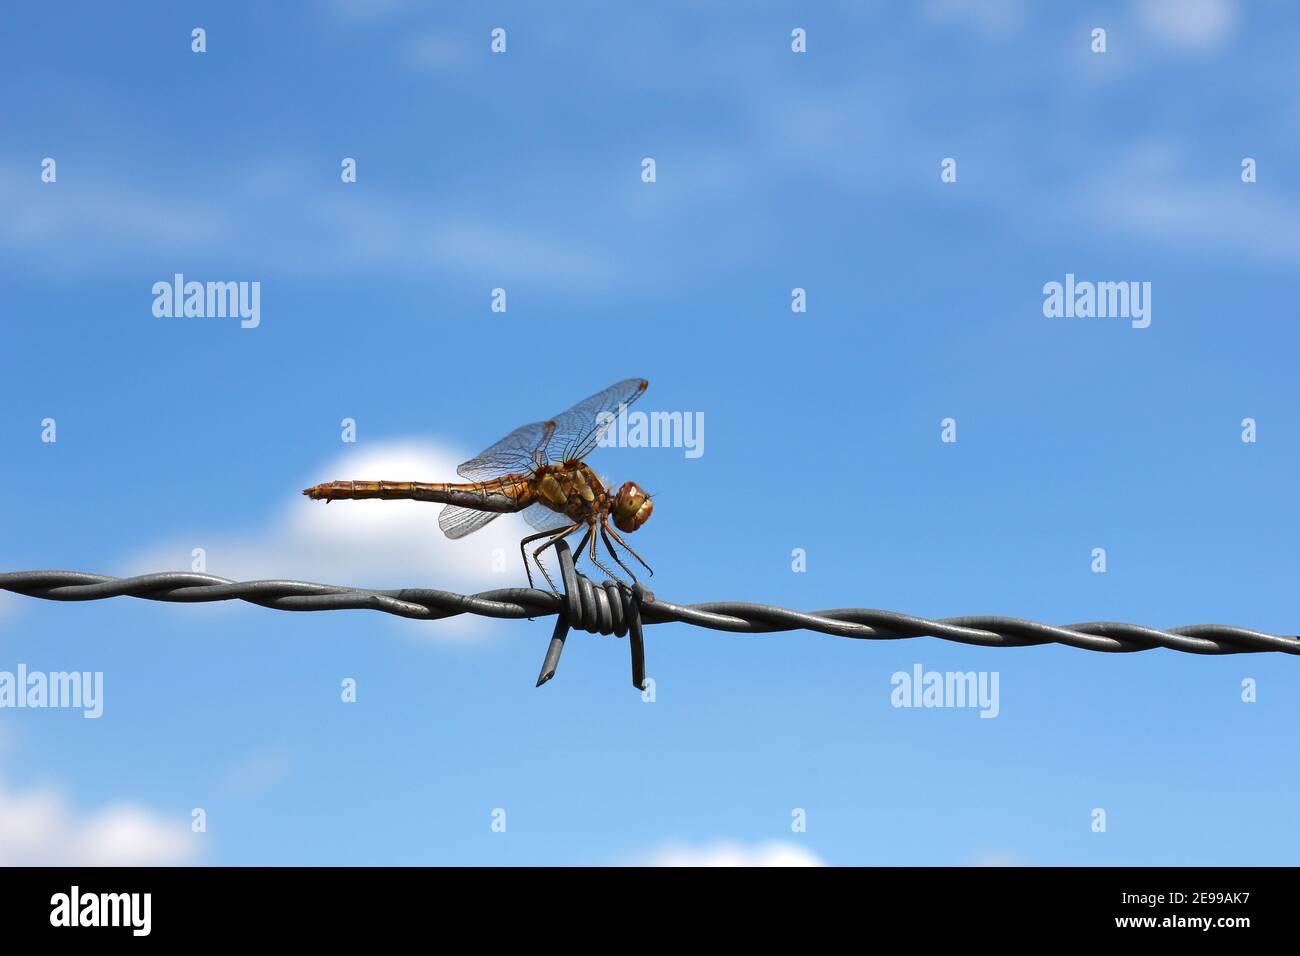 Dragonfly resting on barbed wire. Concept image illustrating fragile nature versus industrial metal objects. With copy space. Stock Photo